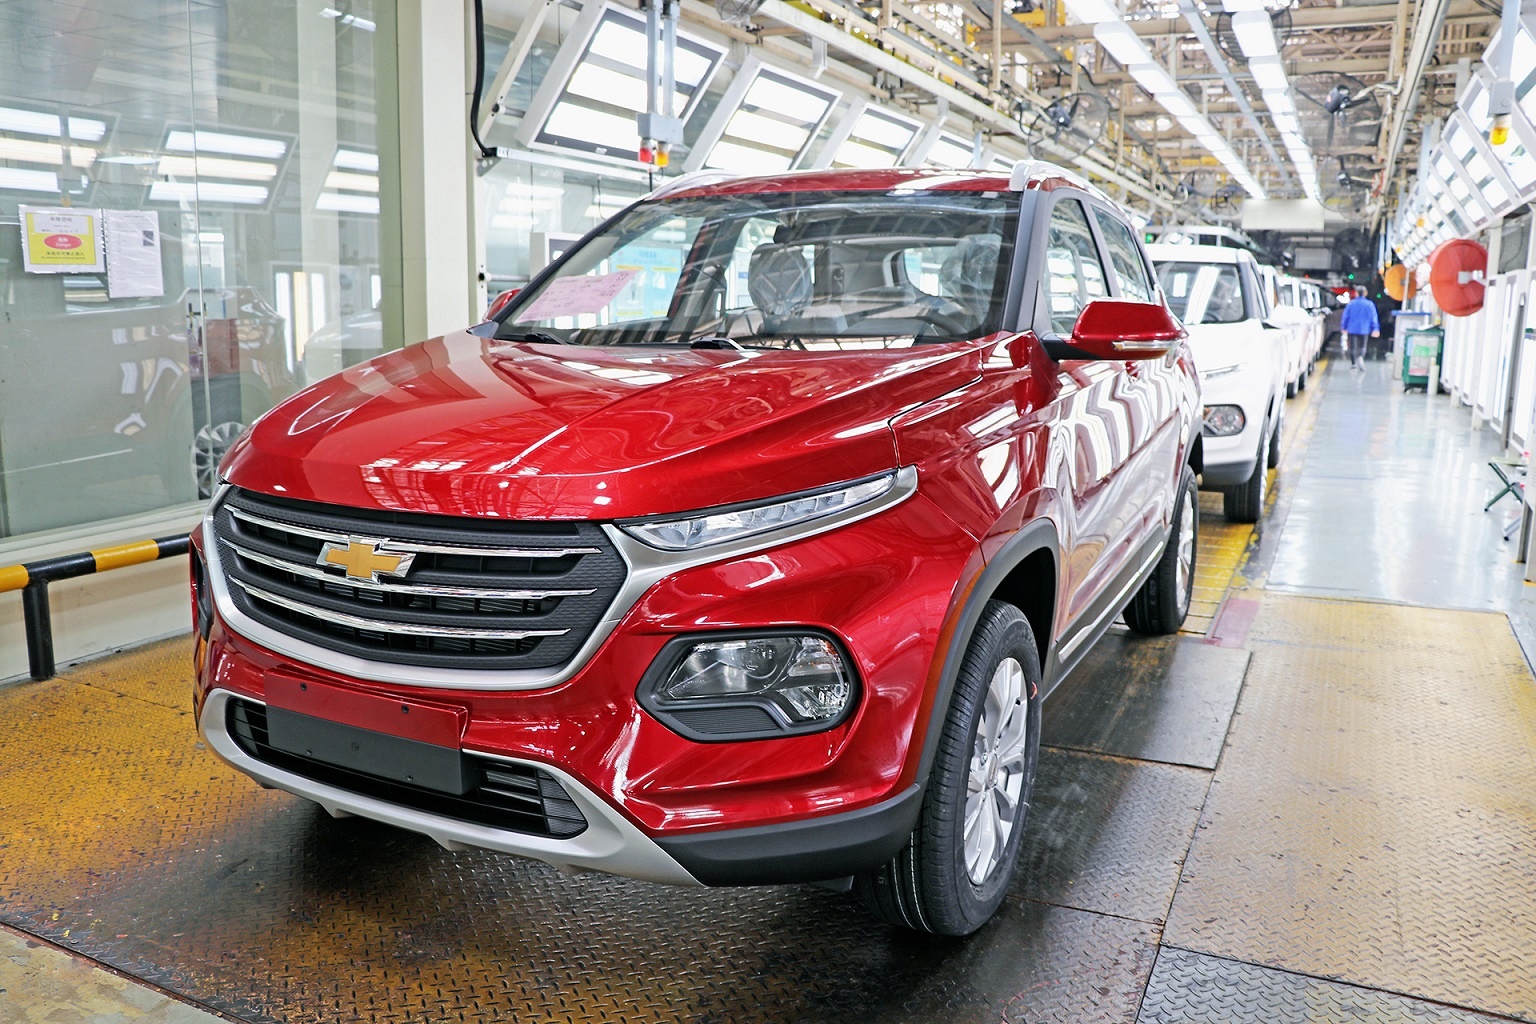 The First Middle East Spec Chevrolet Groove Rolls Off the Production Line, Eager to Arrive in the Region